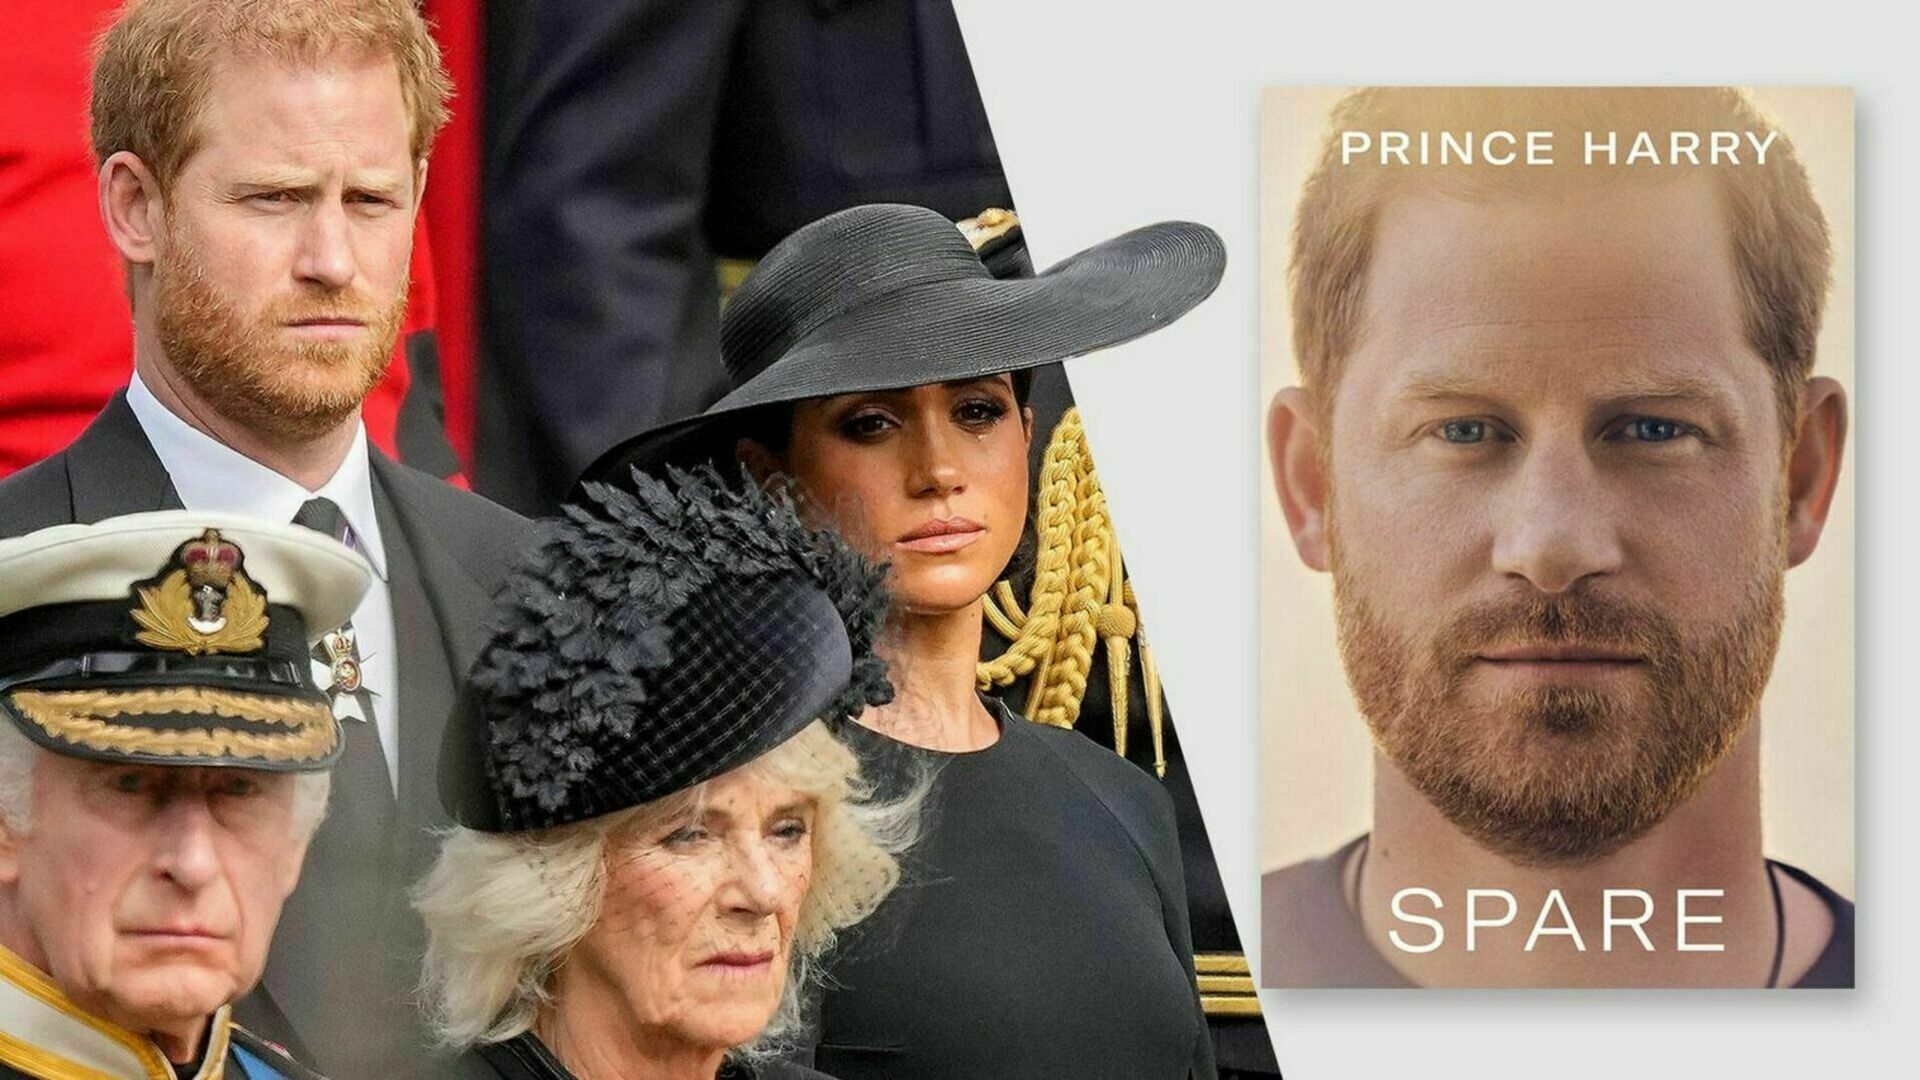 Prince Harry's autobiography sold almost 1.5 million copies on the first day of sales